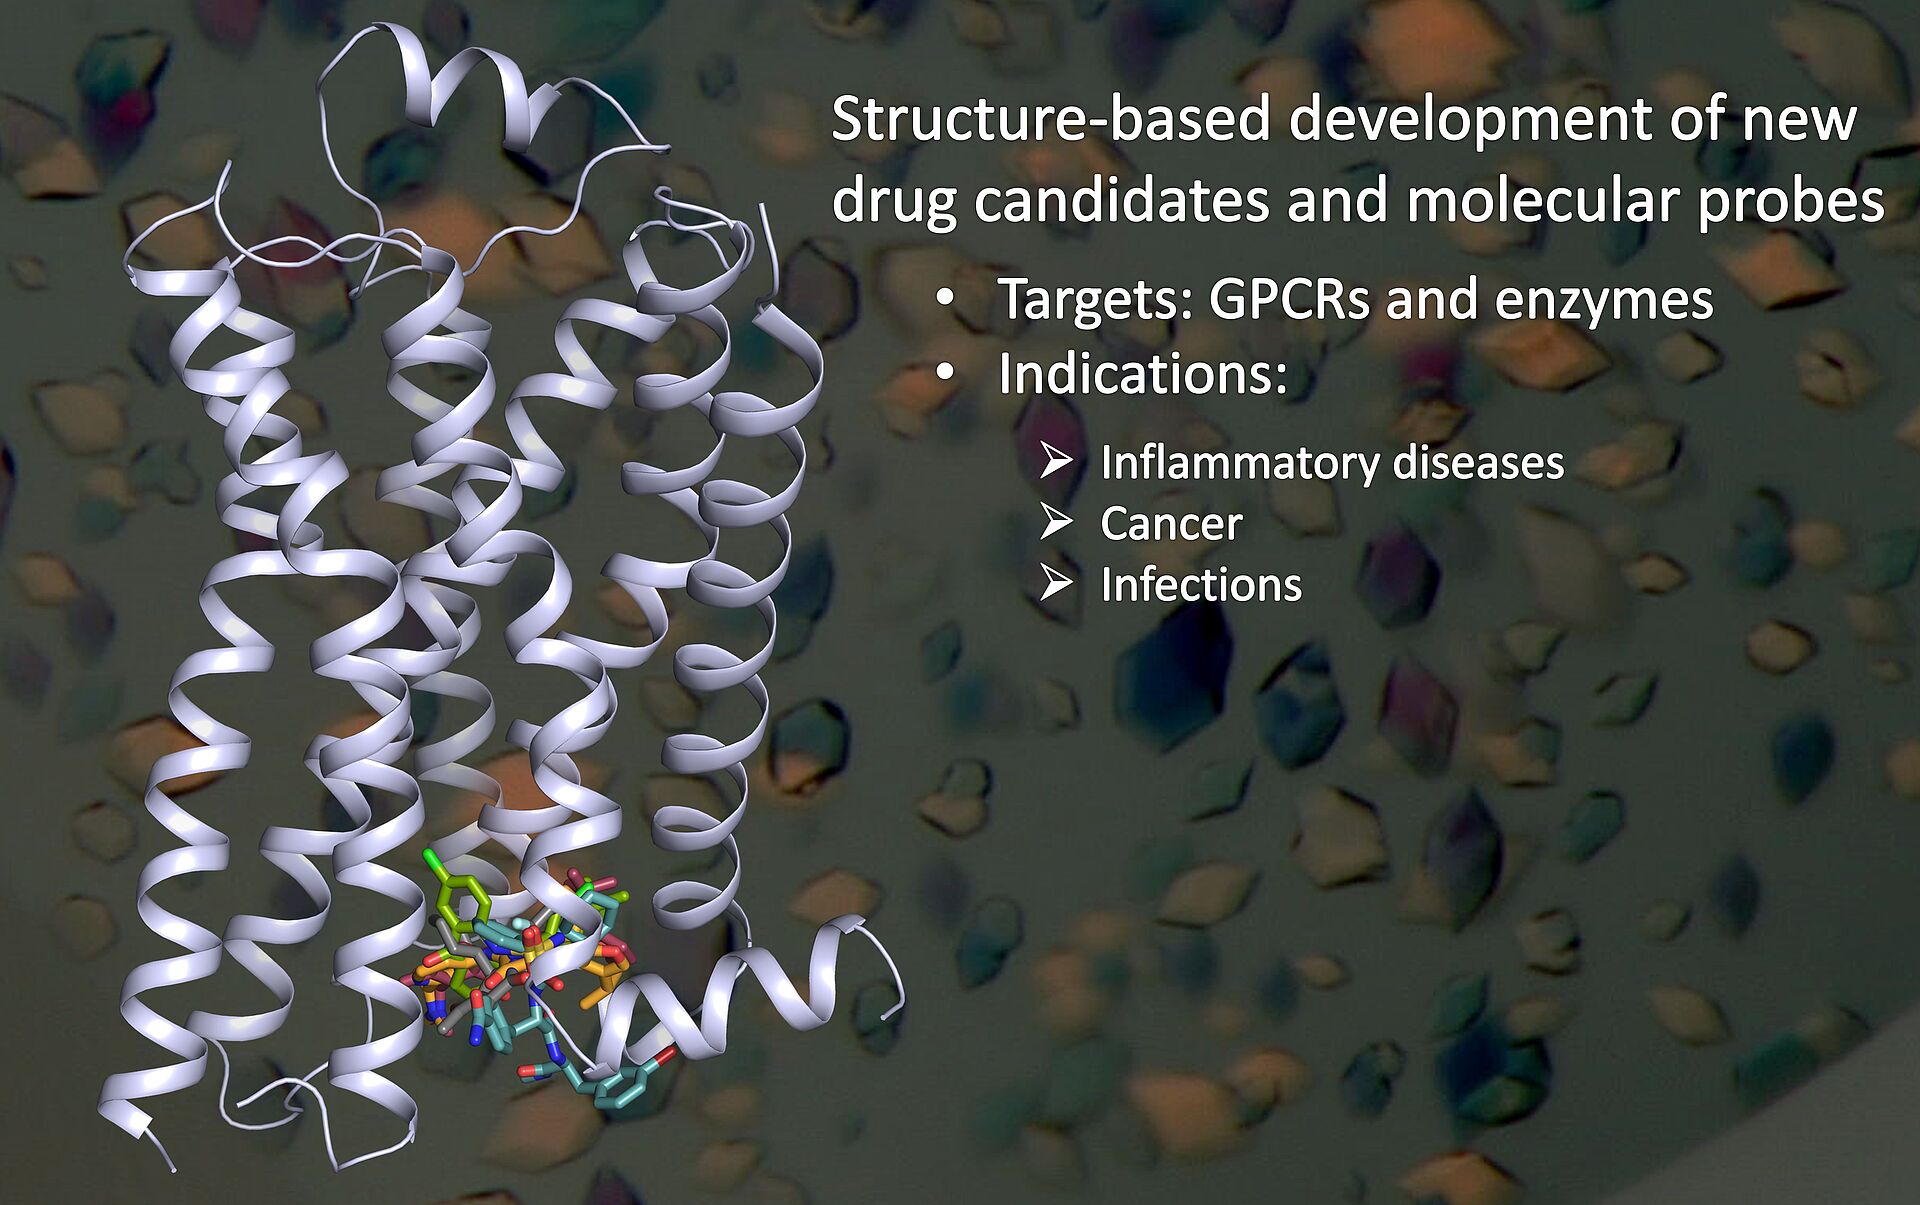 Structure-based development of new drug candidates and molecular probes. Targets: GPCRs and Enzymes. Indications: Inflammaotoy diseases, Cancer, Infections